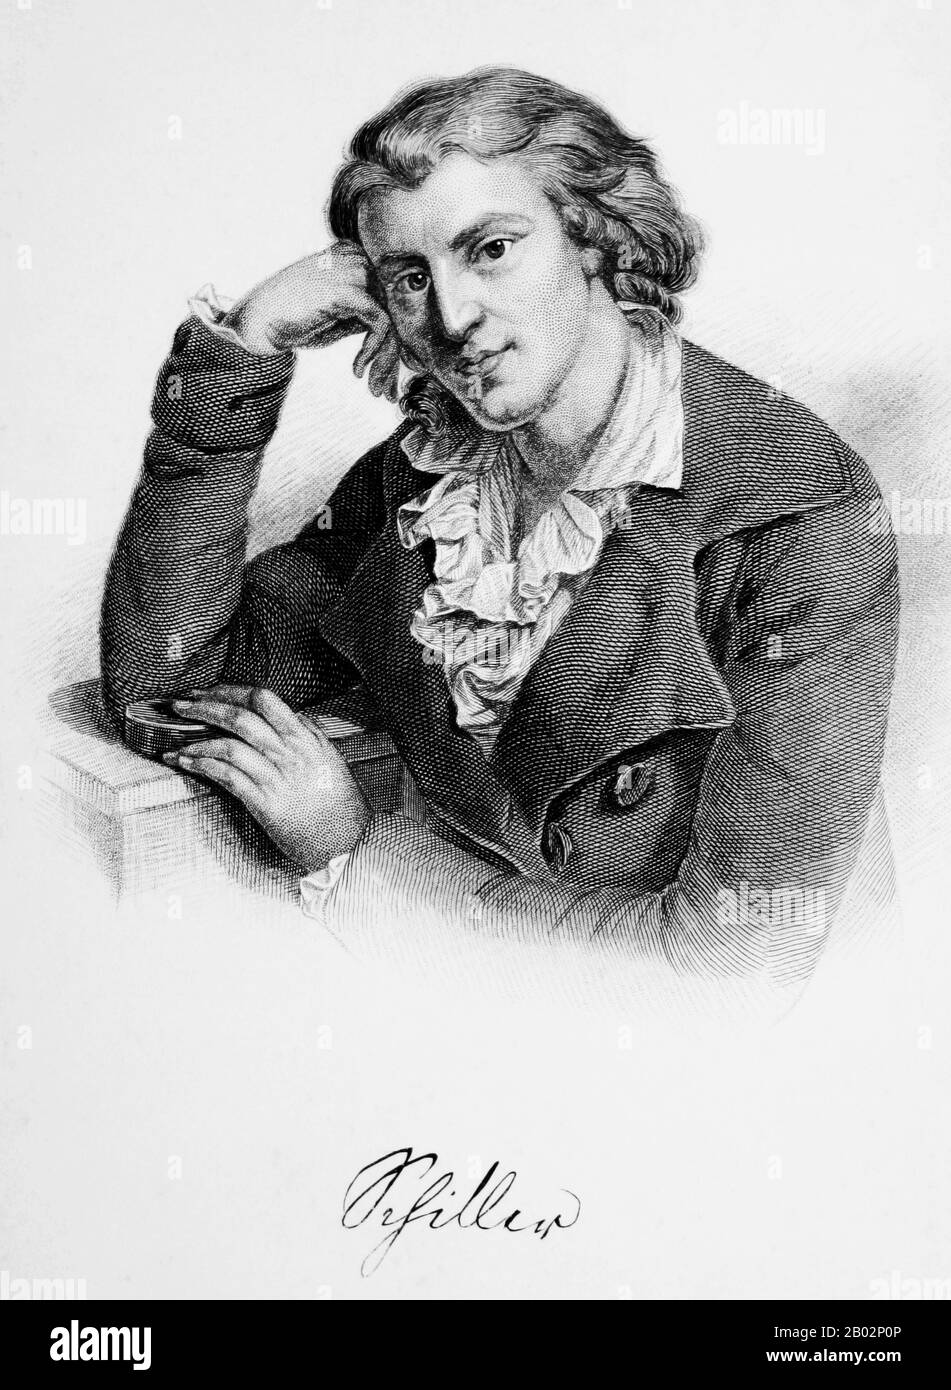 Johann Christoph Friedrich von Schiller (10 November 1759 – 9 May 1805) was a German poet, philosopher, historian, and playwright.   During the last seventeen years of his life (1788–1805), Schiller struck up a productive friendship with Johann Wolfgang von Goethe. They frequently discussed issues concerning aesthetics, and Schiller encouraged Goethe to finish works he left as sketches. This relationship and these discussions led to a period now referred to as Weimar Classicism.  Schiller is considered by most Germans to be Germany's most important classical playwright. Stock Photo